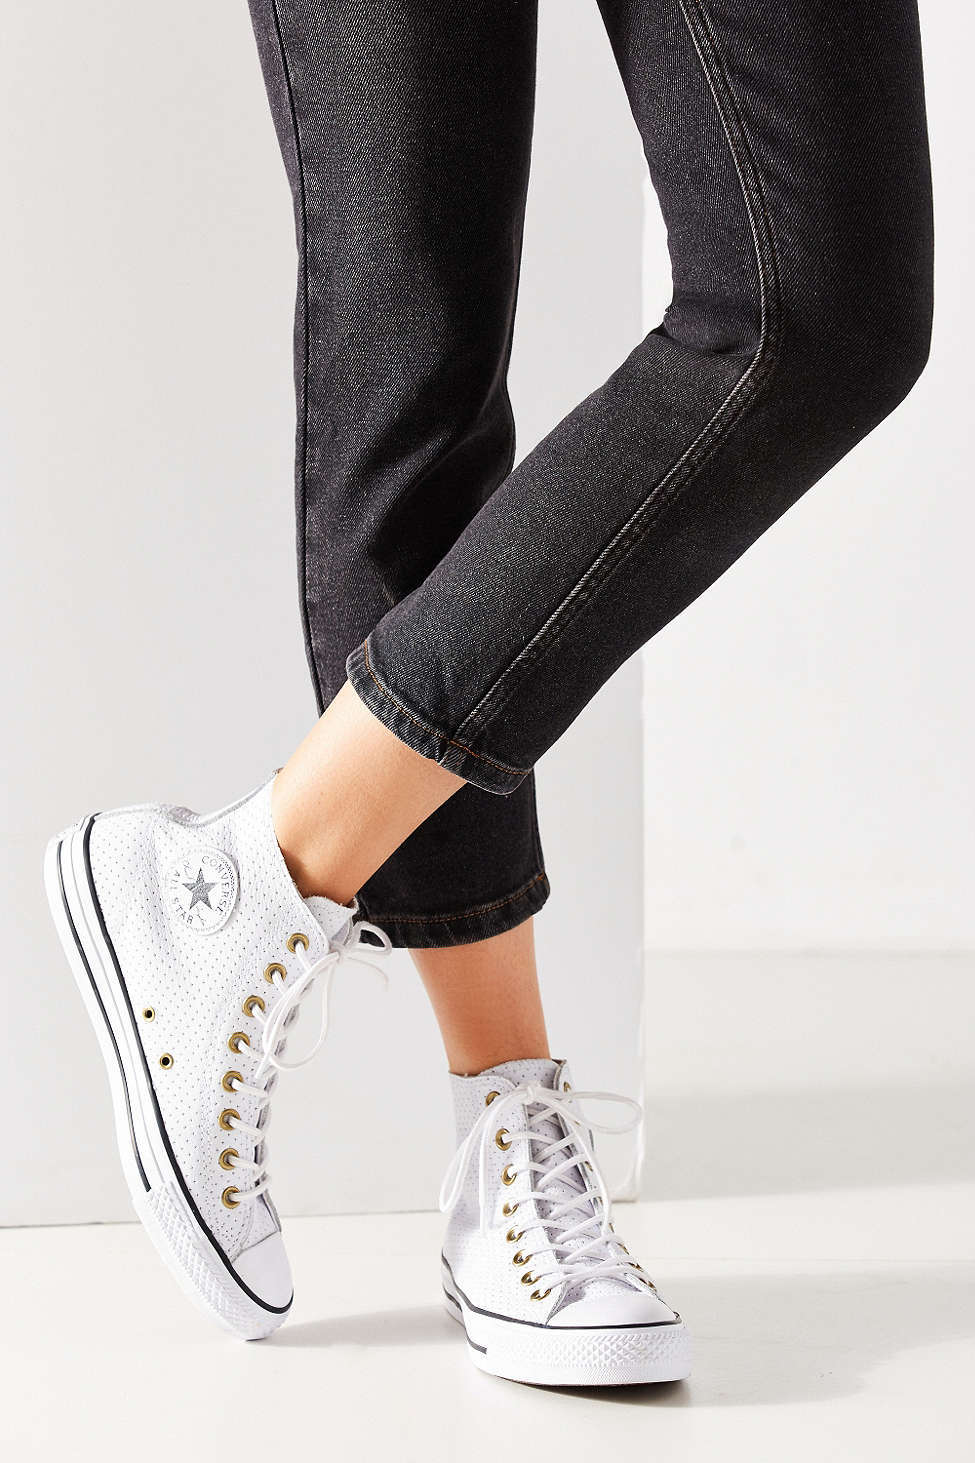 Converse Perforated Top Sellers, 58% OFF | ebcconnects.com